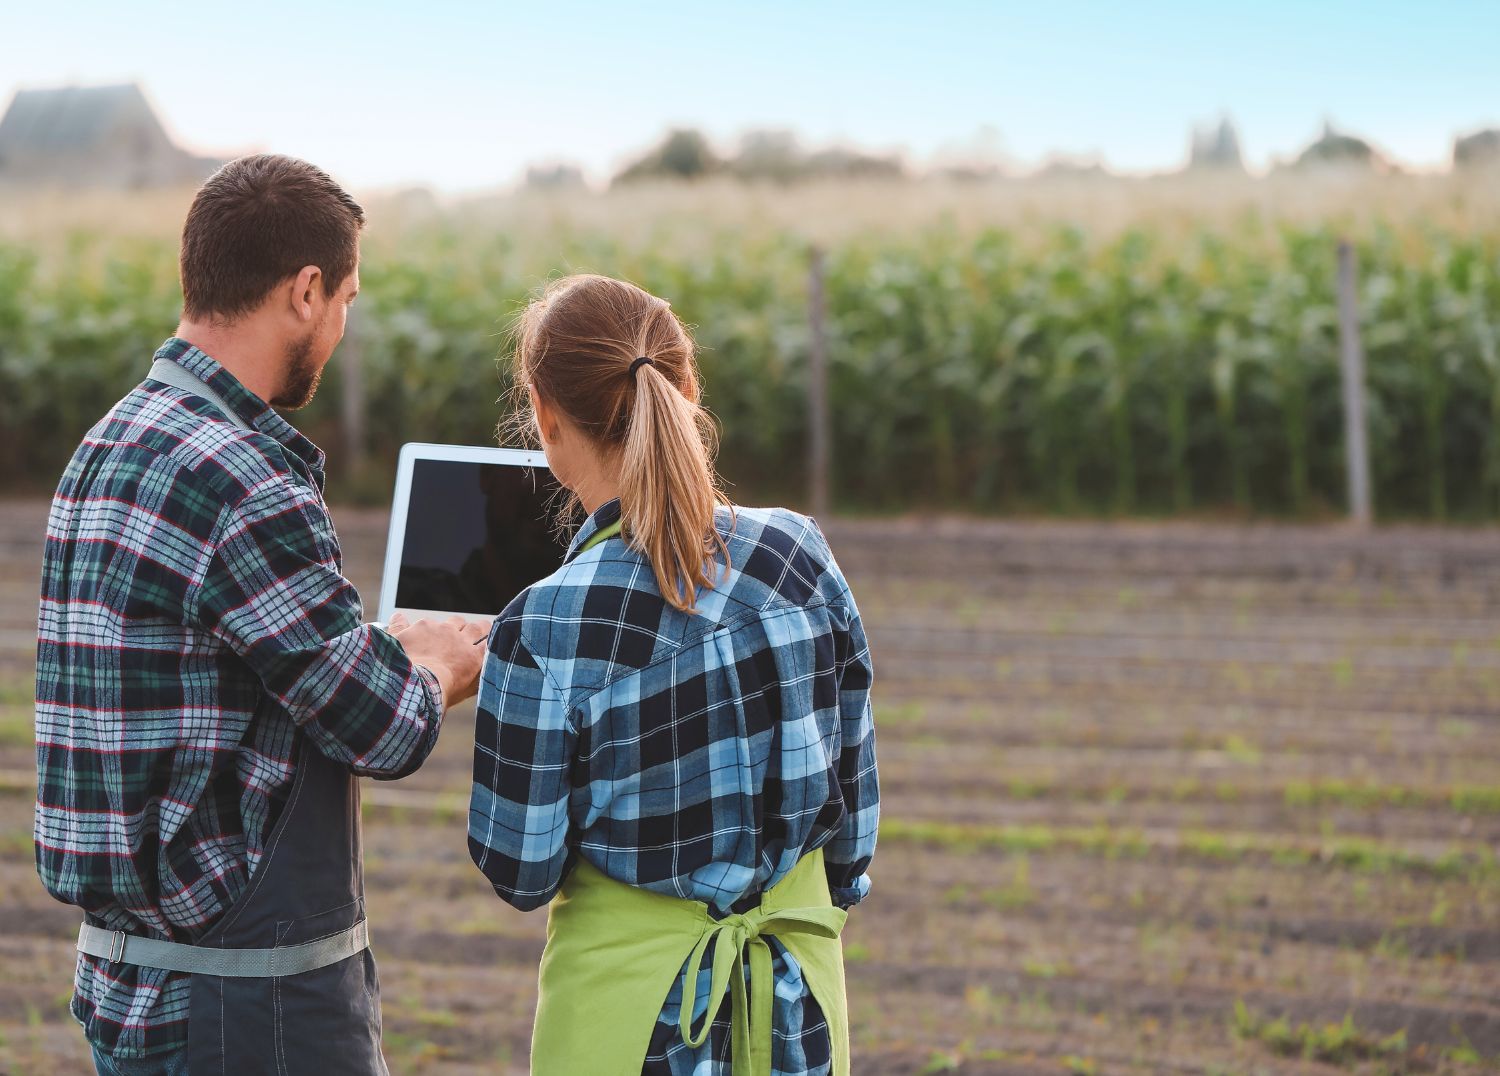 2 farmers trading on an agriculture b2b platform